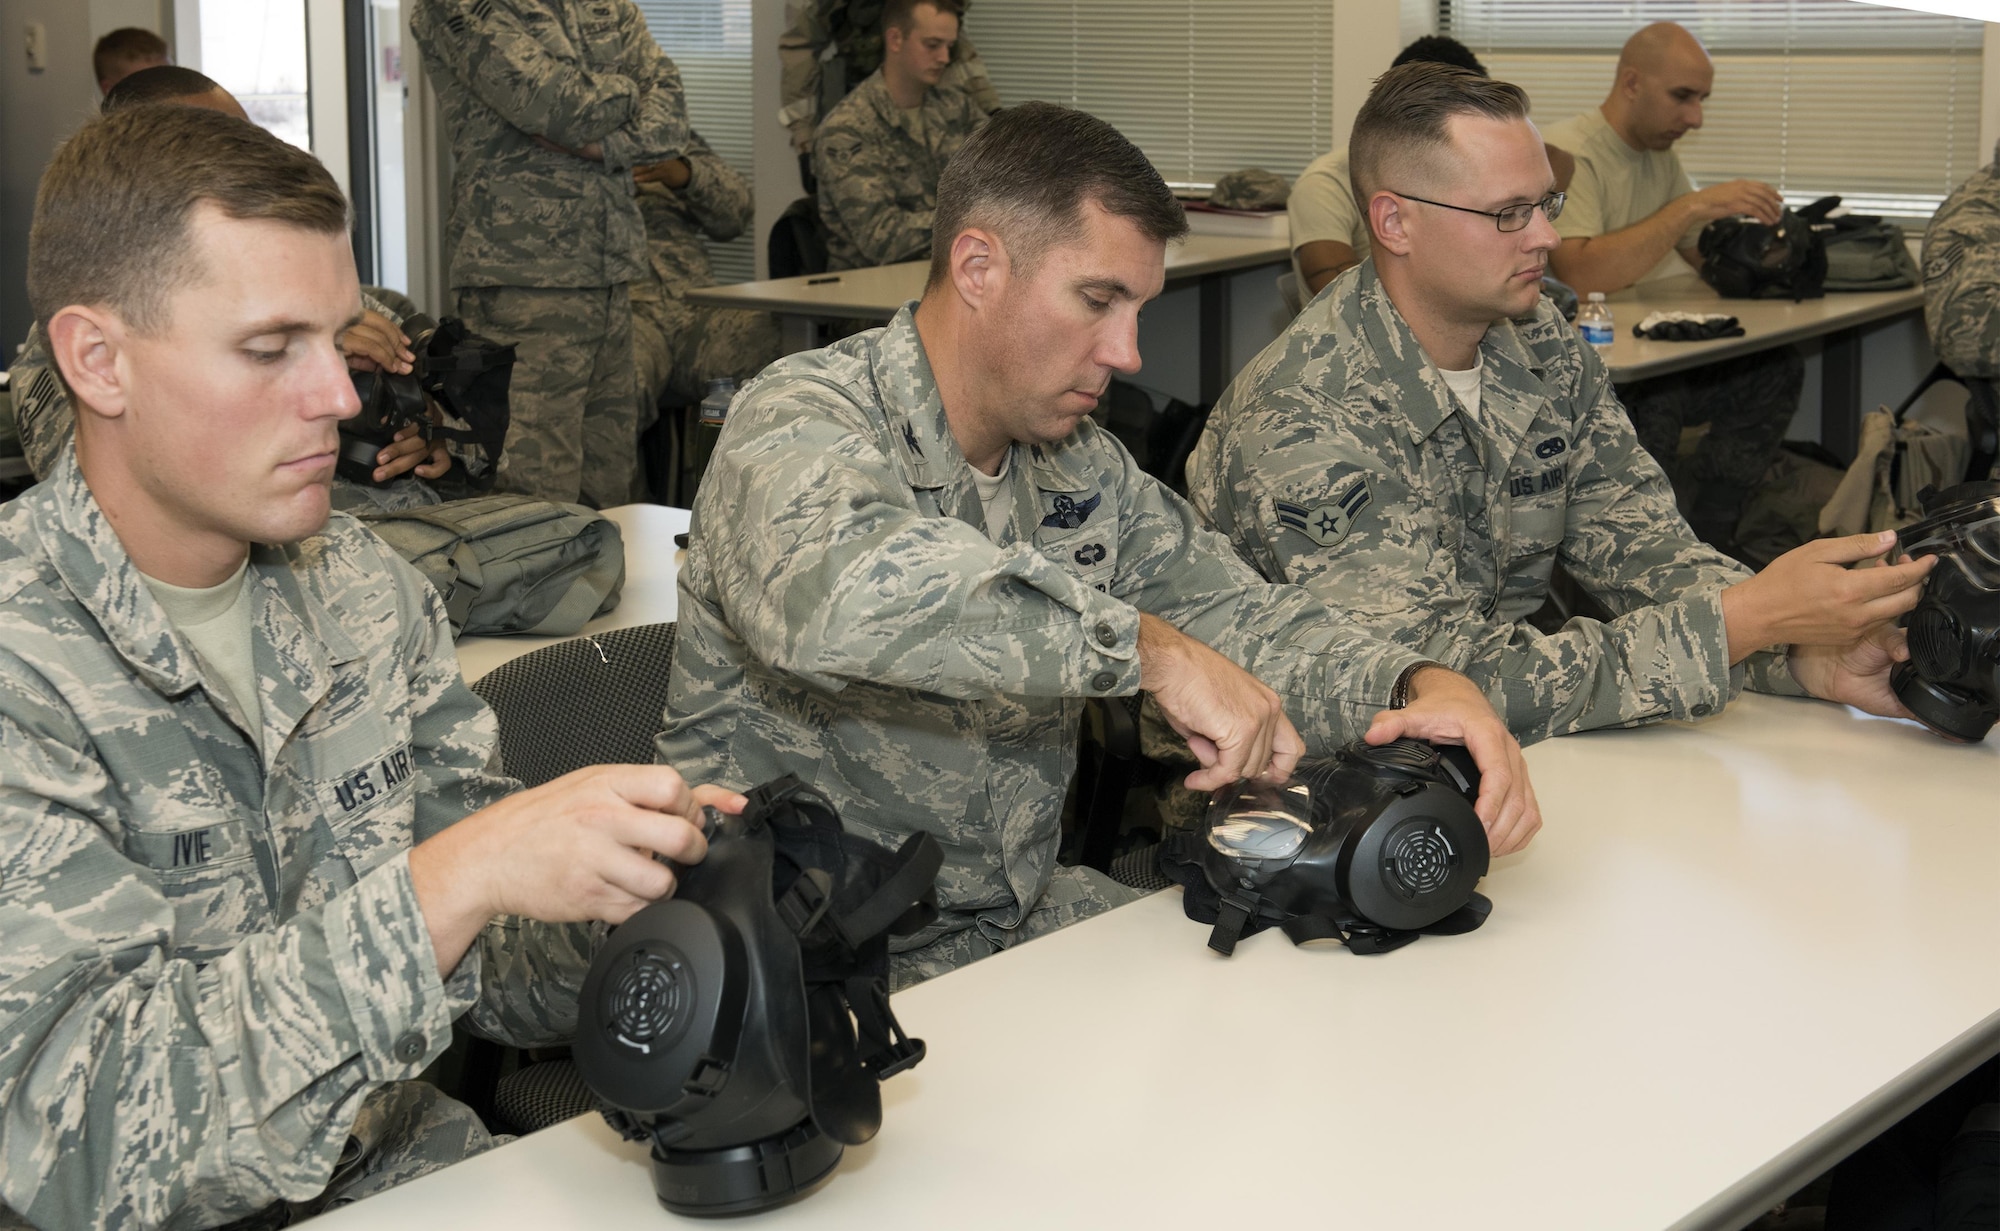 U.S. Air Force Senior Airman Cody Ivie (left), 921st Contingency Response Squadron, U.S. Air Force Col. John Klein (left), the commanding officer of the 60th Air Mobility Wing, and Senior Airman Alexander Valks (right), 660th Aircraft Maintenance Squadron, inspect their gas masks during a chemical, biological, radiological and nuclear defense survival skills training course on Travis Air Force Base, Calif., Sep. 21, 2017. The course consists of individual and team demonstration performance objectives that provide hands-on training and evaluation of knowledge acquired. (U.S. Air Force photo by Heide Couch)